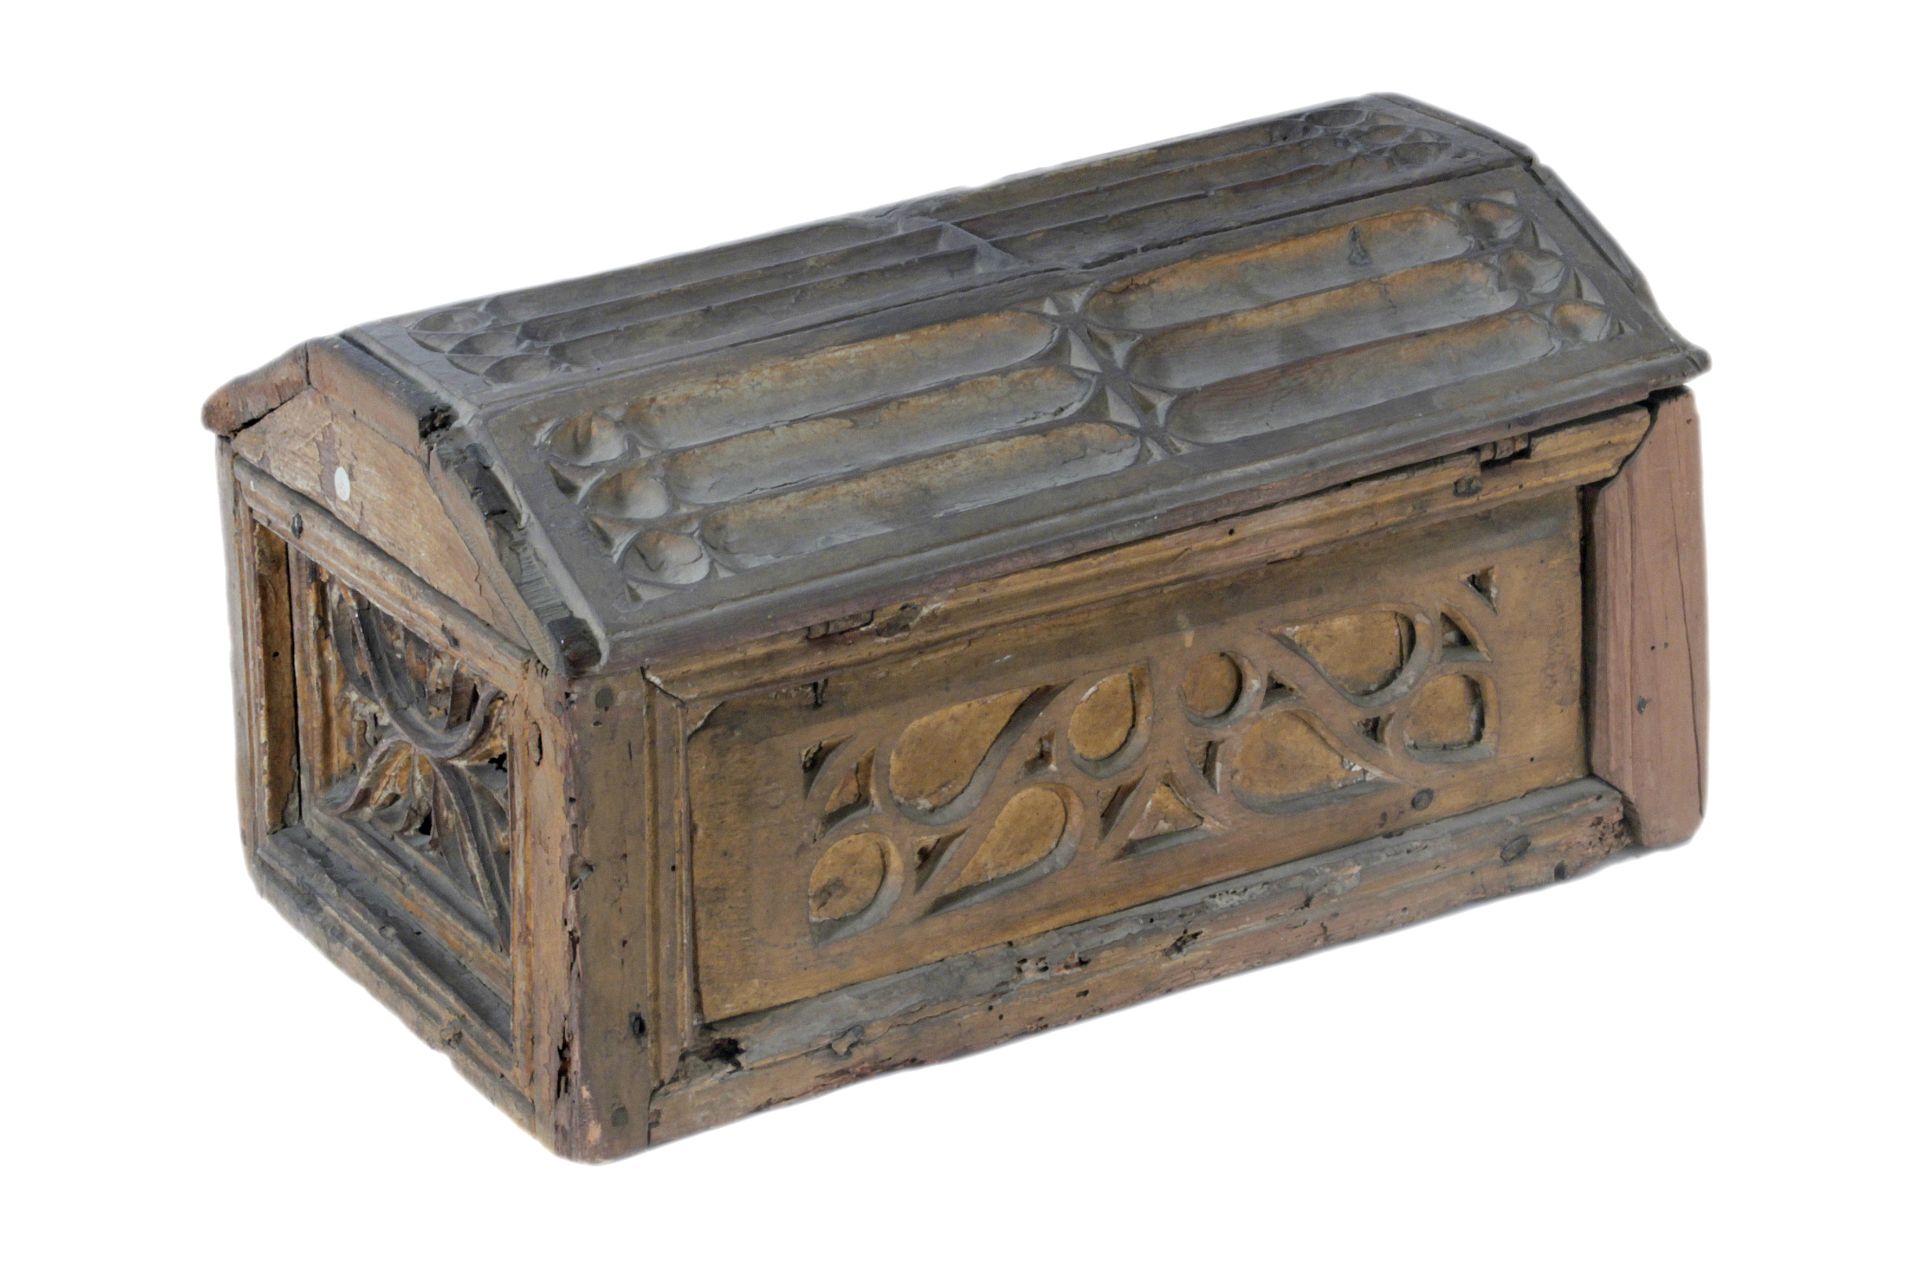 16th century Spanish Gothic chest in carved wood - Image 2 of 4